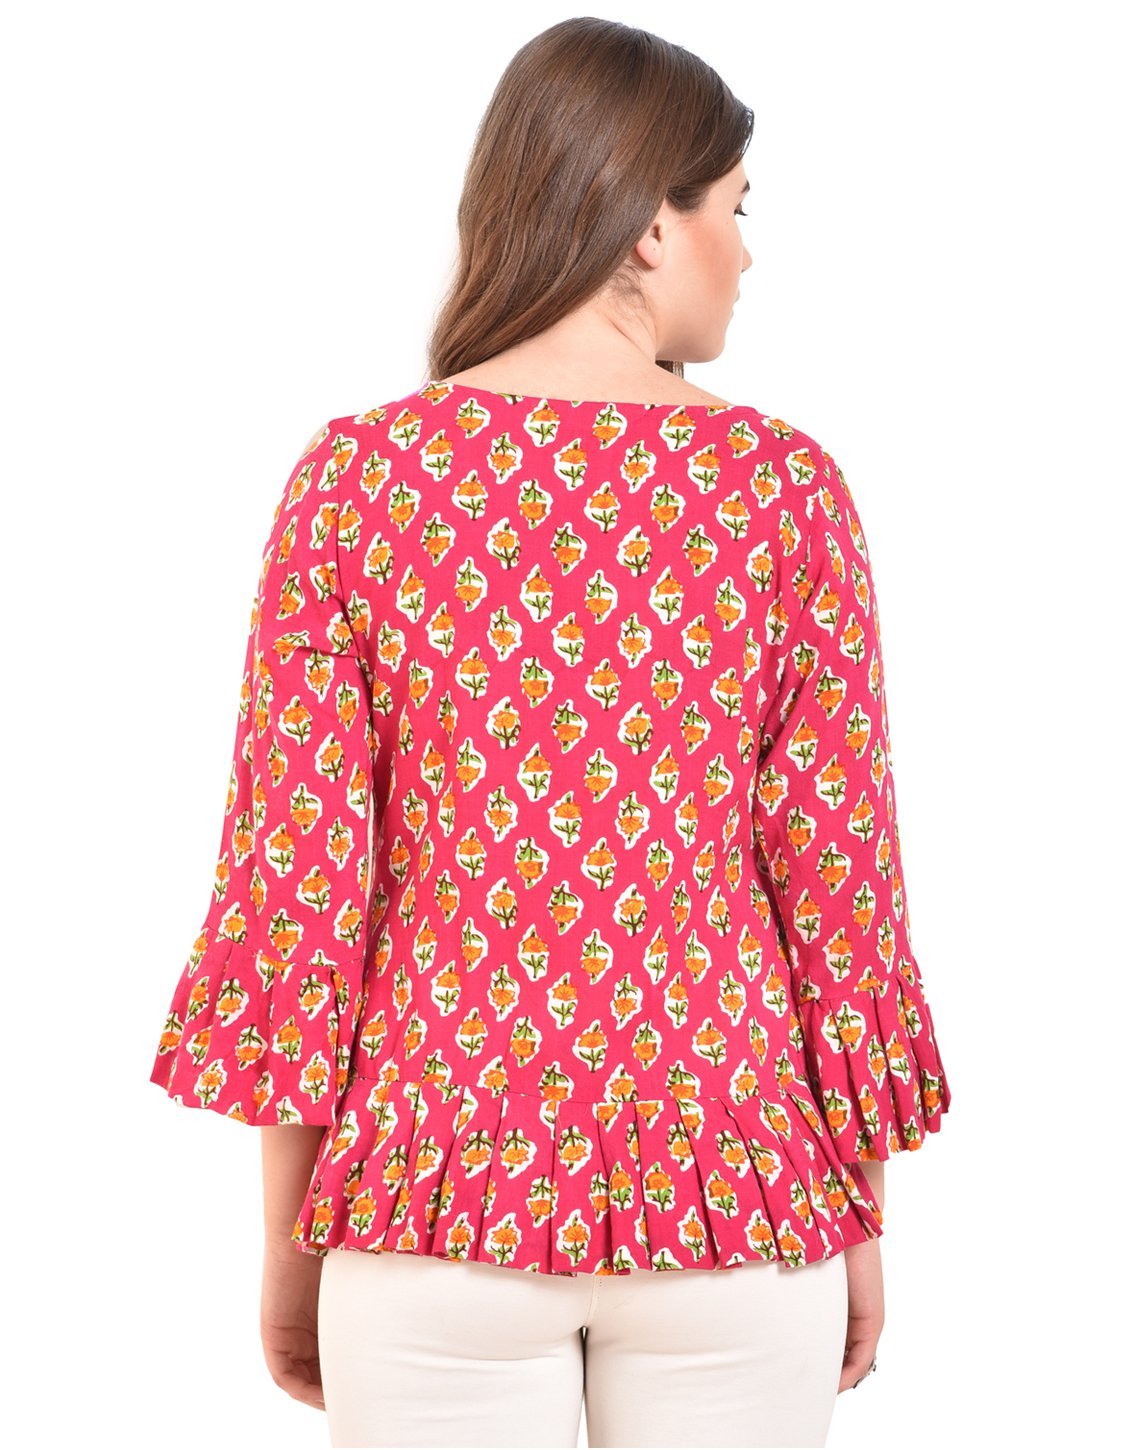 Women's Pink Printed Bell Sleeve Round Rayon Casual Top - Myshka